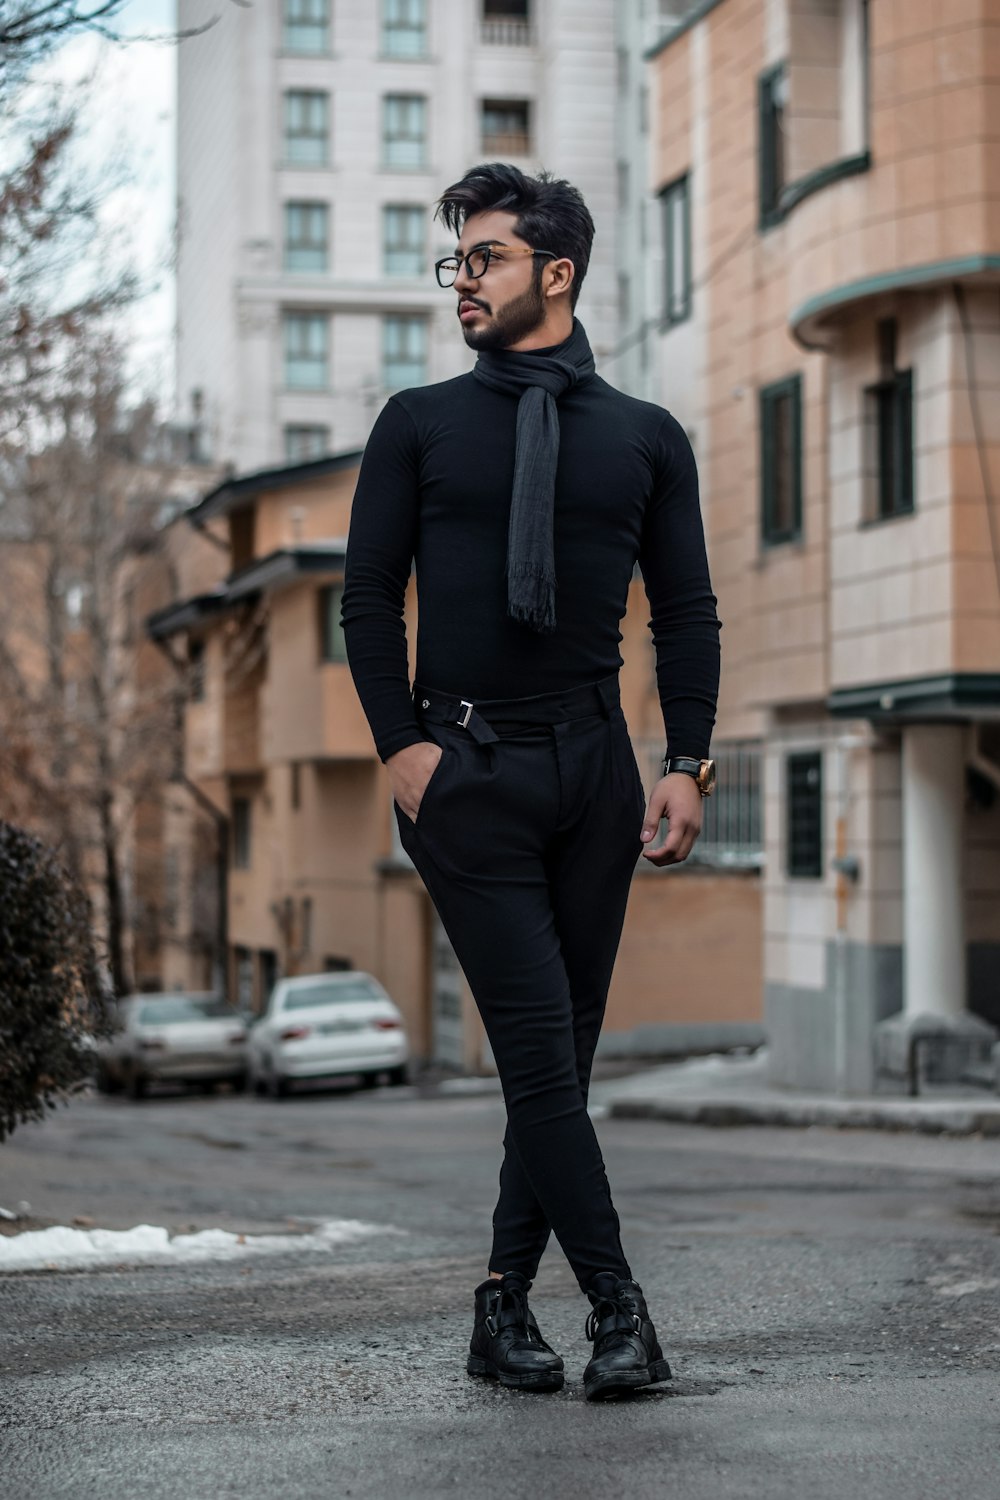 Black Long Sleeve Shirt with Black Dress Pants Outfits For Men (23